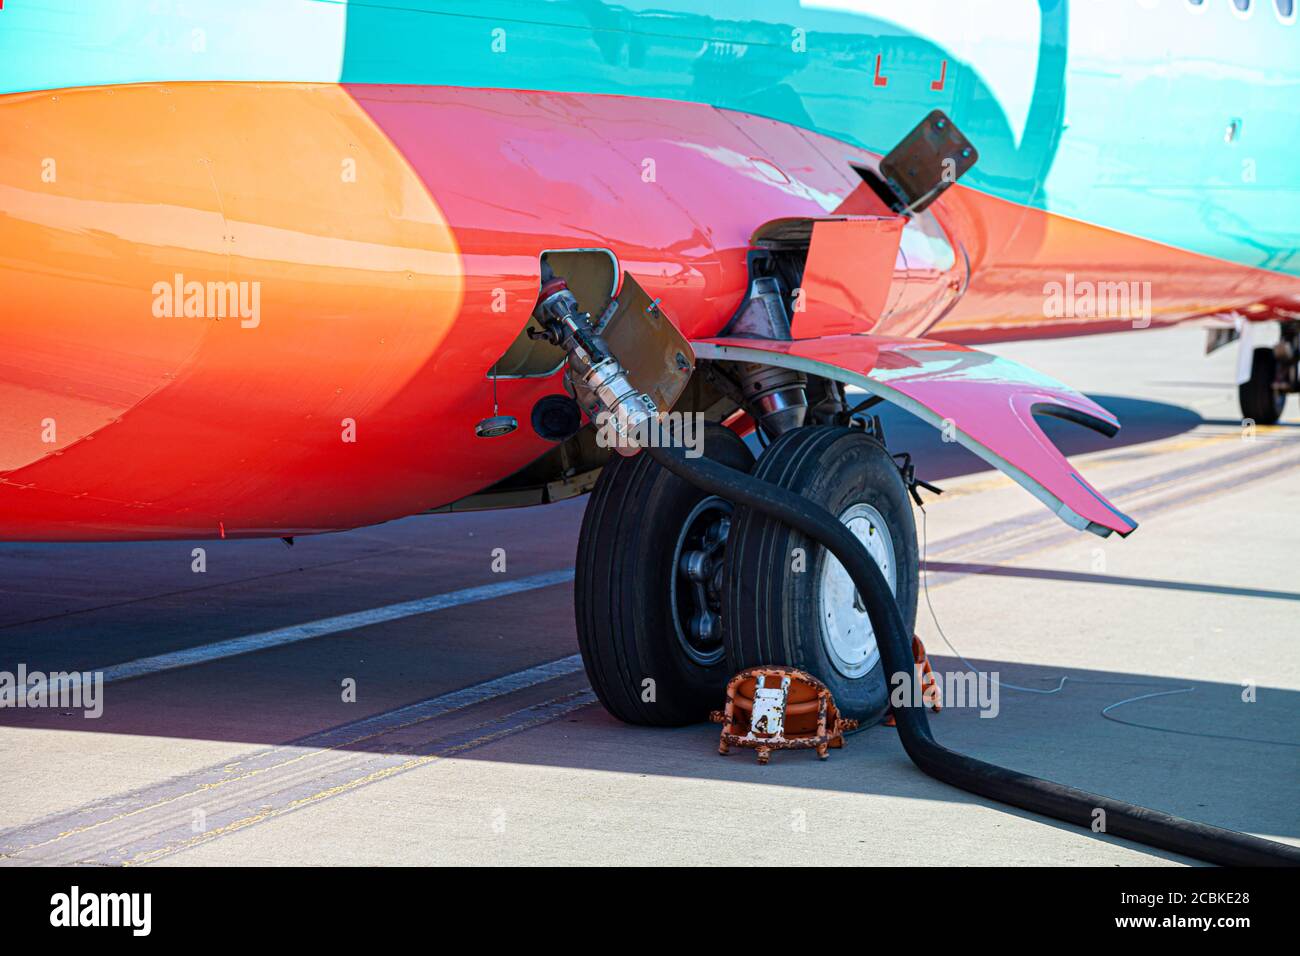 Refueling the plane. Filling tank and gun. Fuel supply through a hose. Weel. Stock Photo